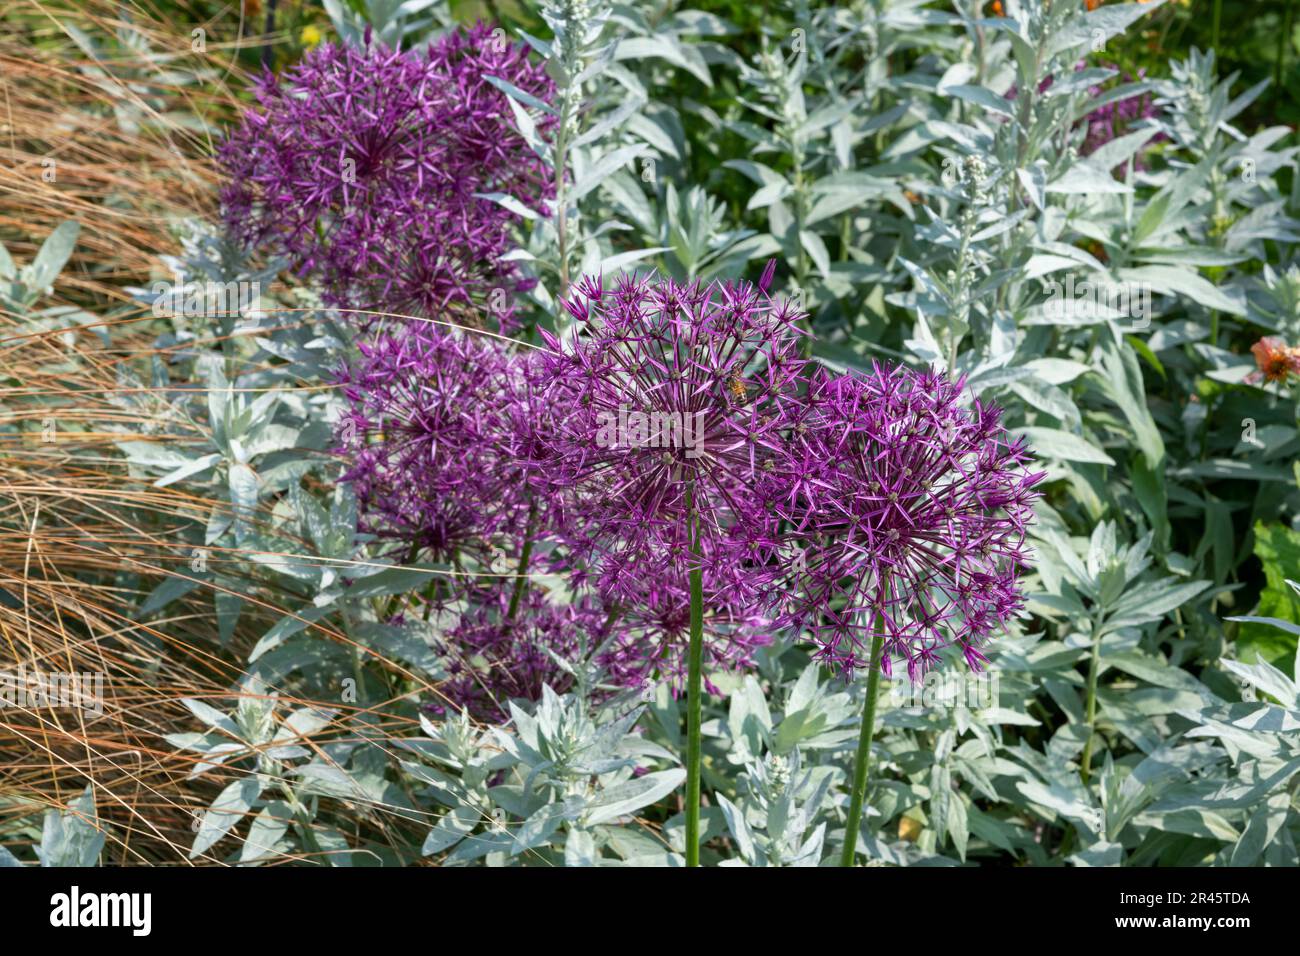 CLose up of purple Allium flowers with a background of silver leaved Artemisia Ludoviciana Valerie Finnis. Stock Photo